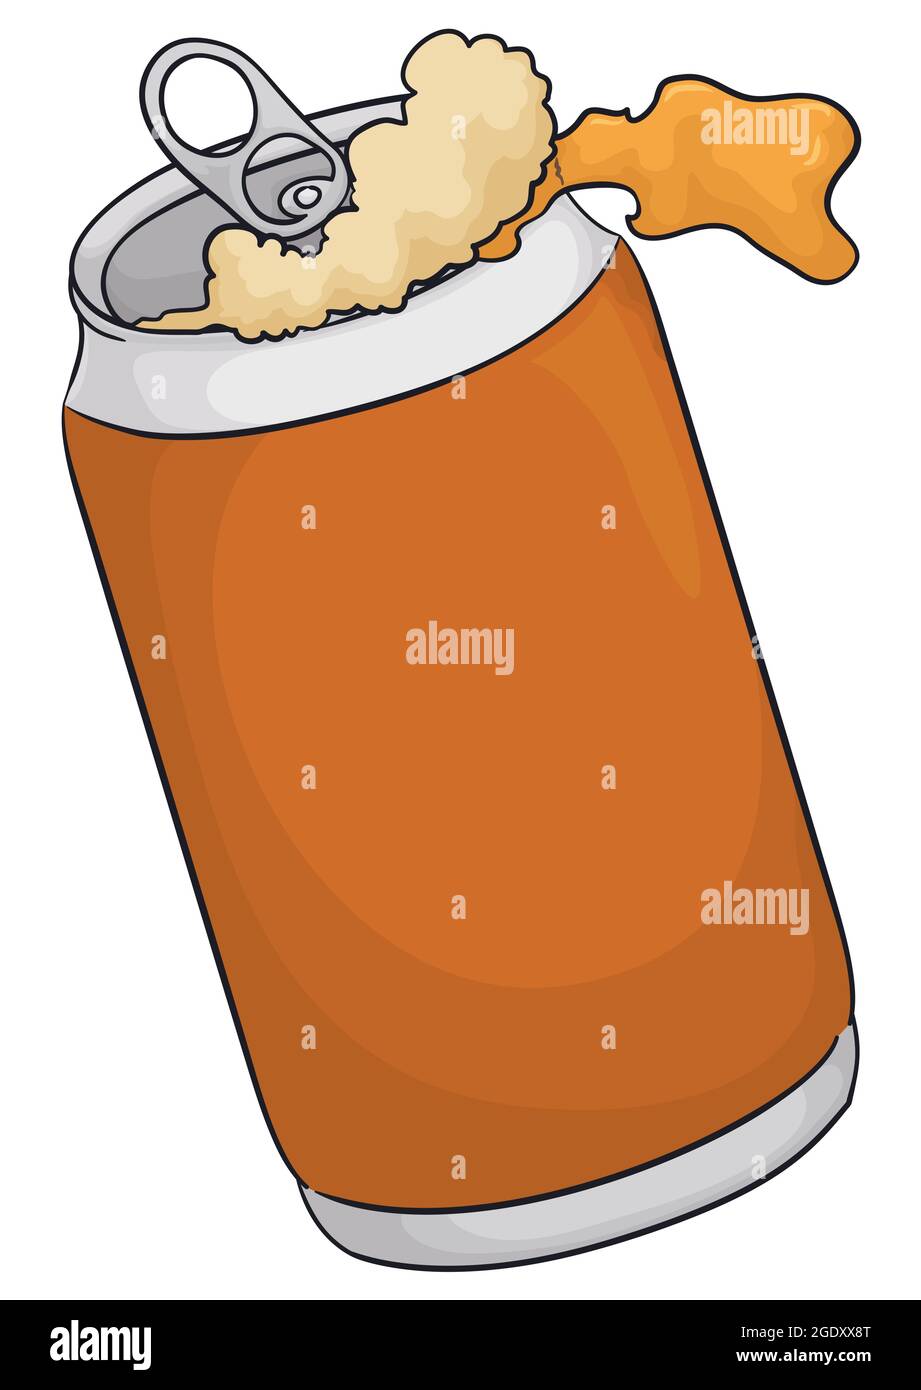 Can of soda or beer spilling abundant froth and liquid, isolated over white background. Stock Vector